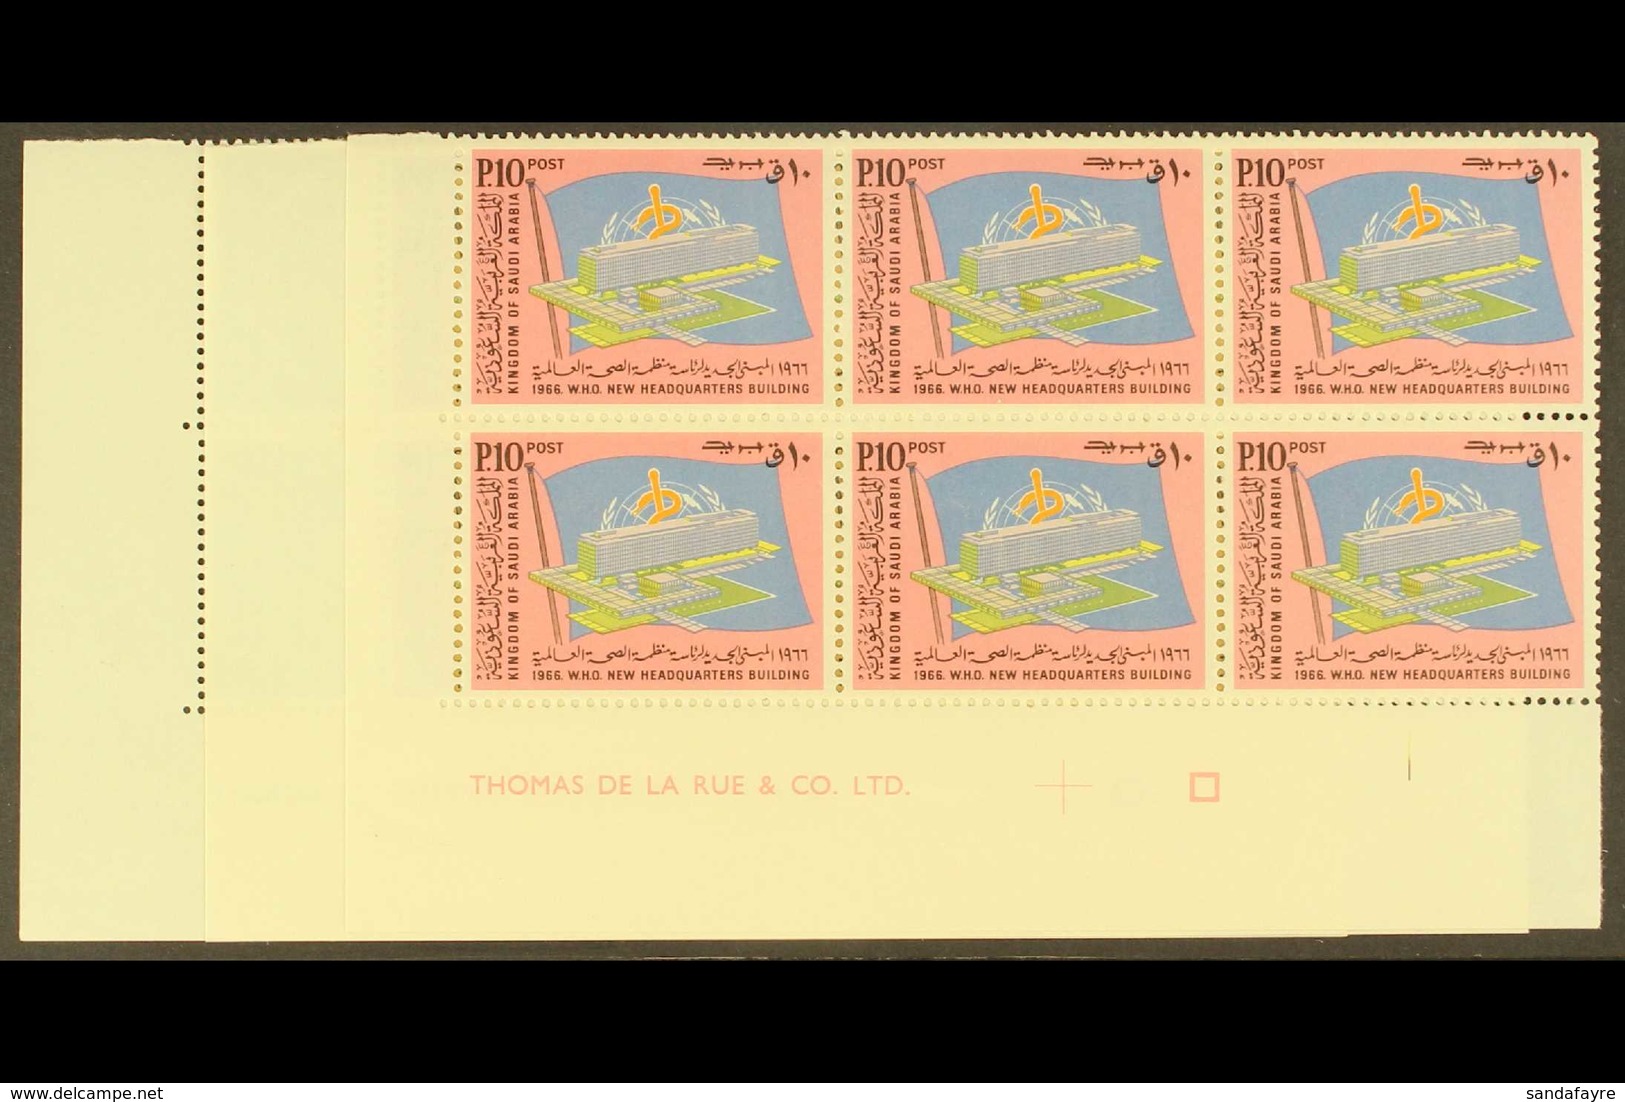 1966 Inauguration Of WHO Headquarters Set Complete, SG 647/9, In Never Hinged Mint Corner Blocks Of 6. (18 Stamps) For M - Saudi Arabia